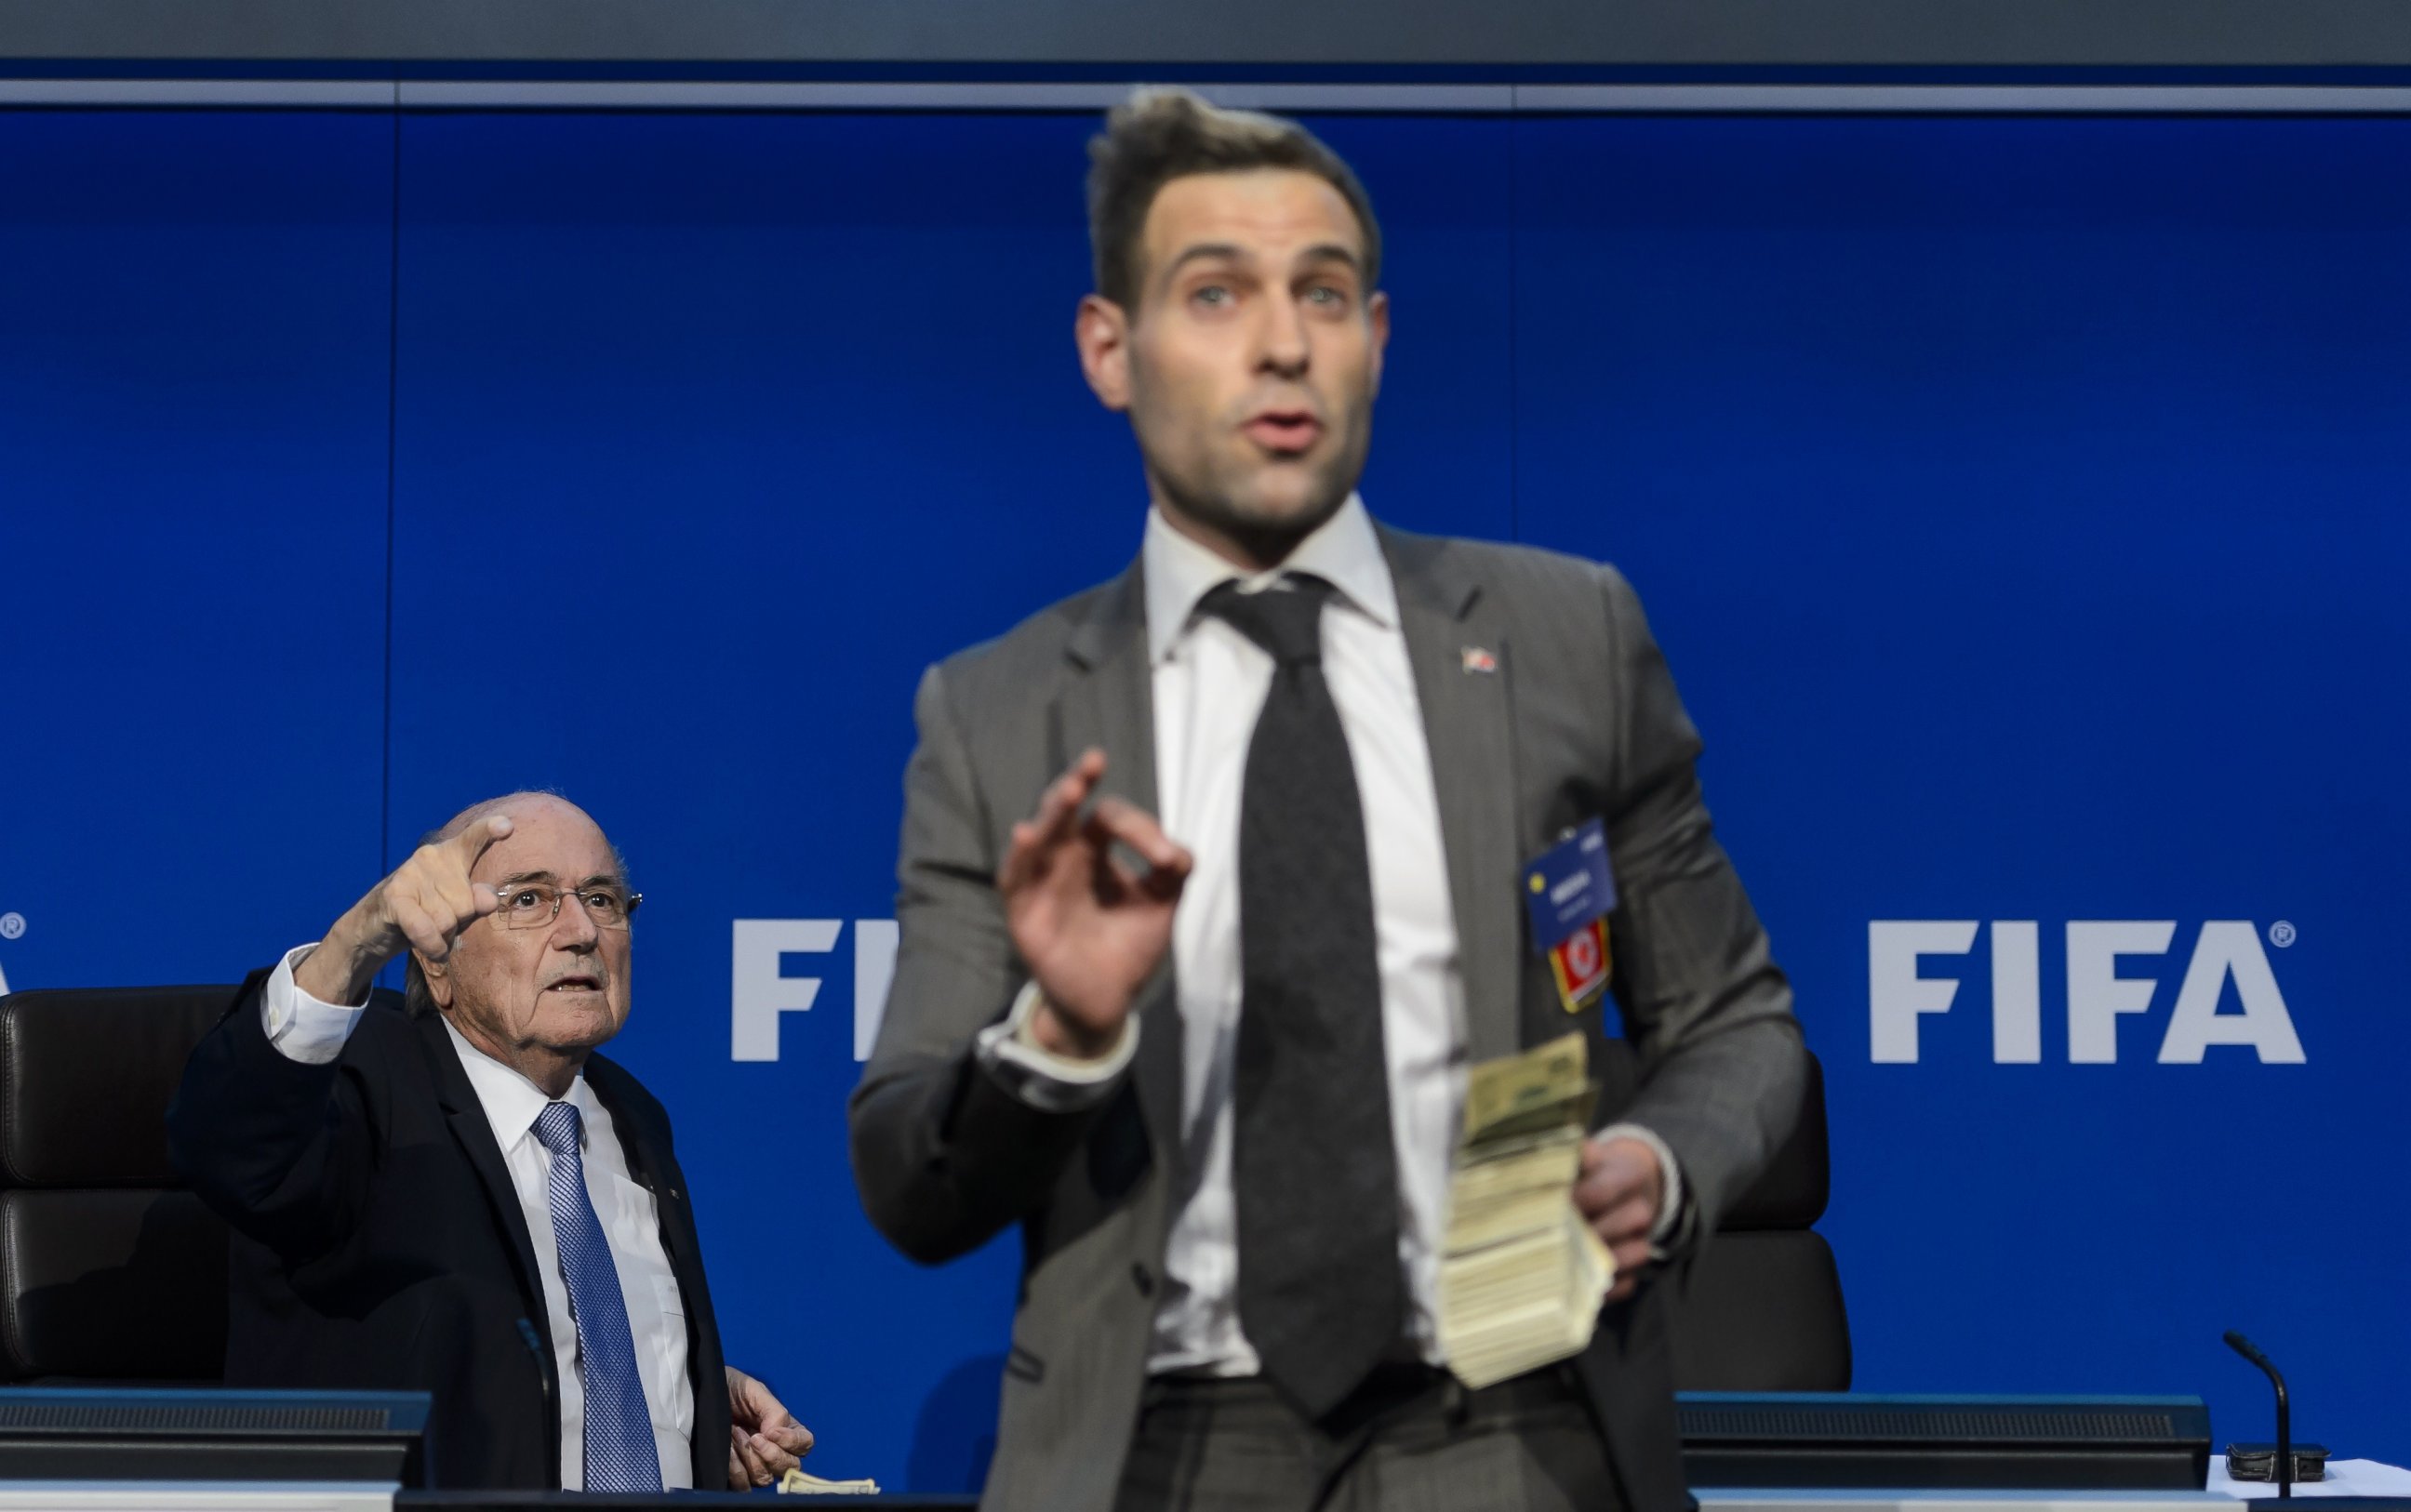 PHOTO: Comedian Simon Brodkin gestures in front of FIFA president Sepp Blatter during a press conference at the football's world body headquarter's on July 20, 2015 in Zurich.